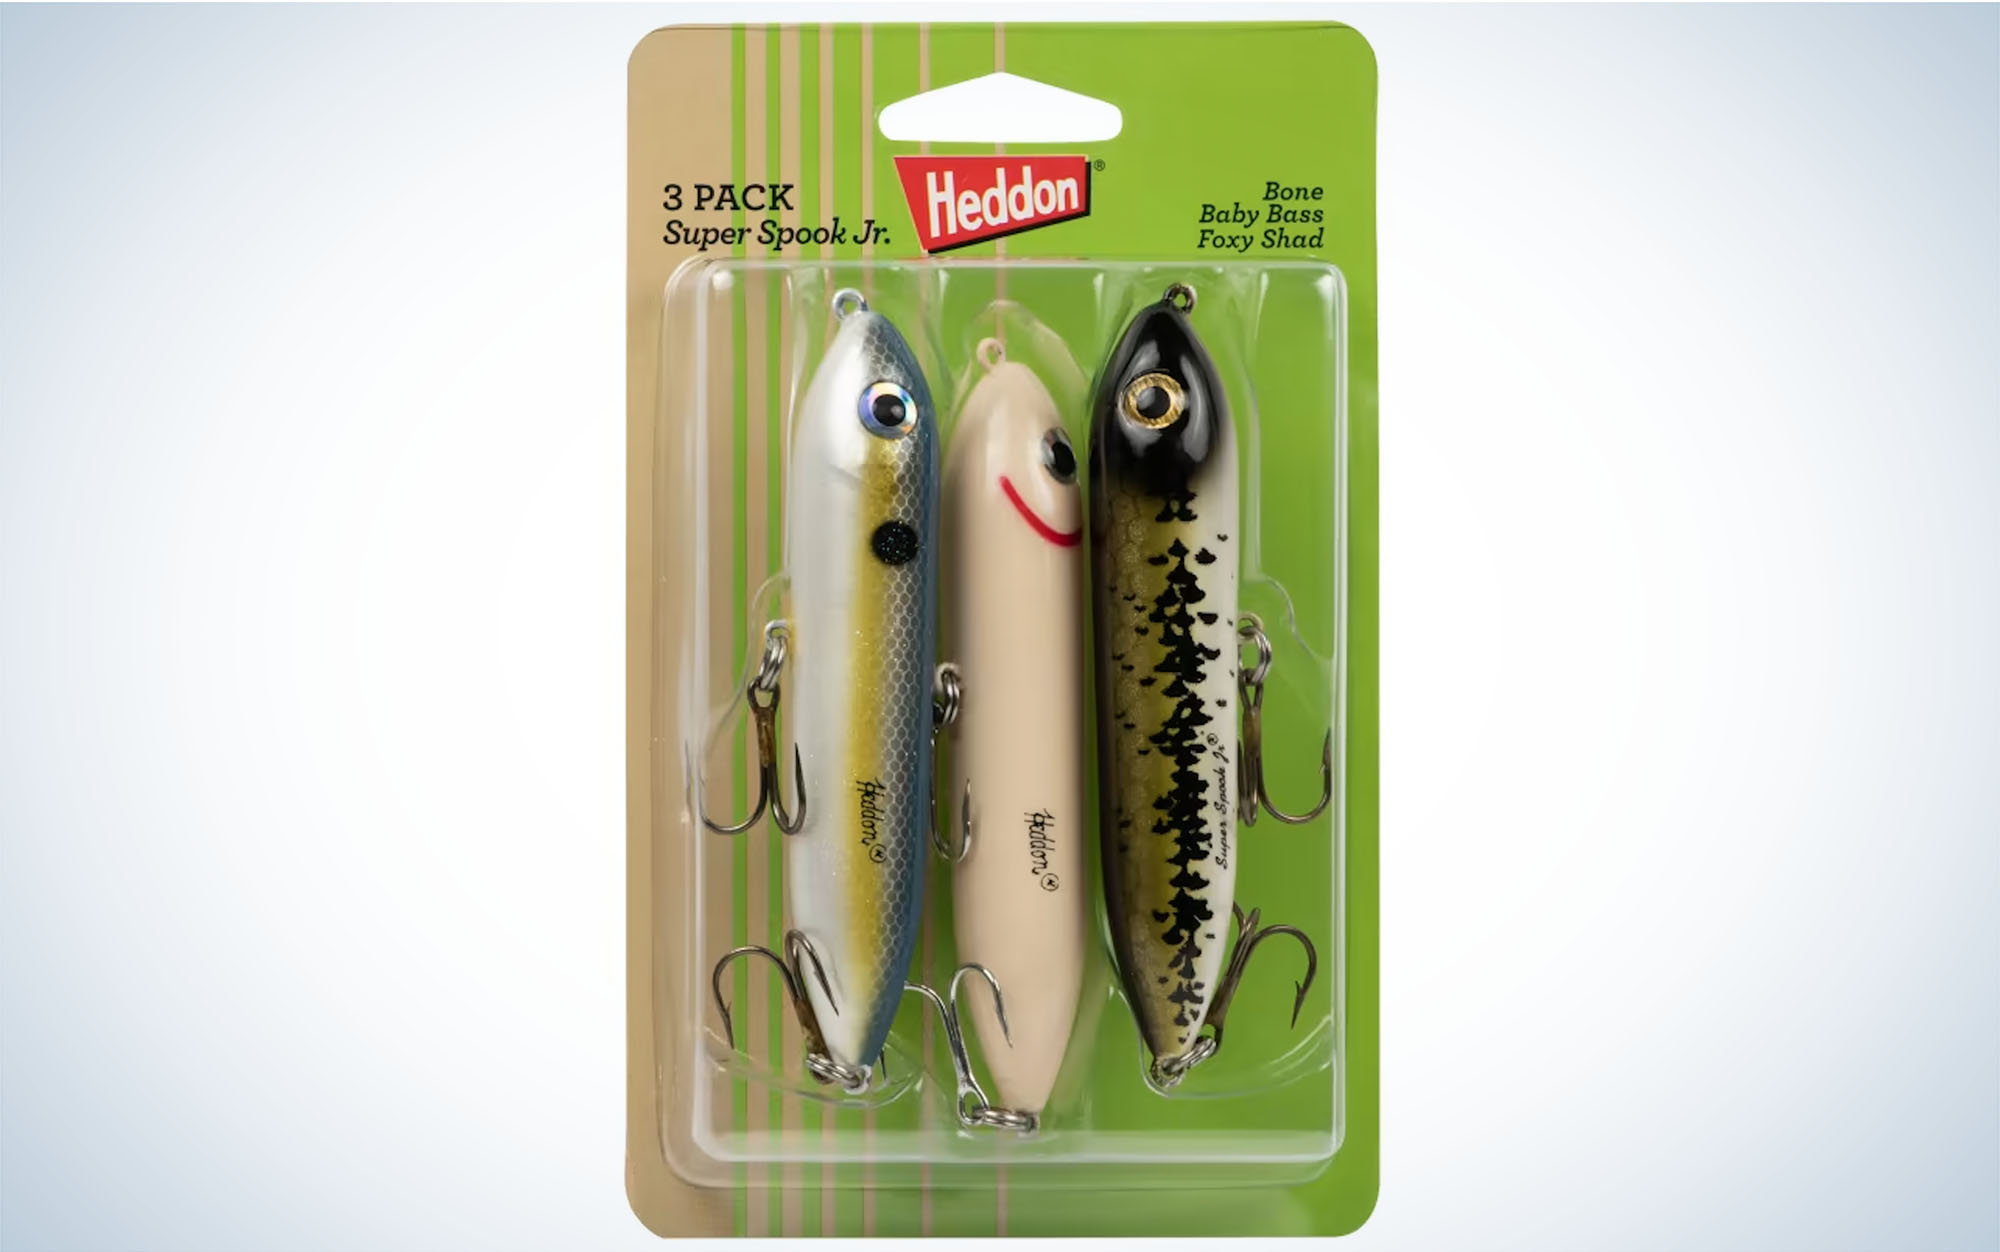 The Heddon Super Spook Jr. are the best topwater lures for smallmouth bass.